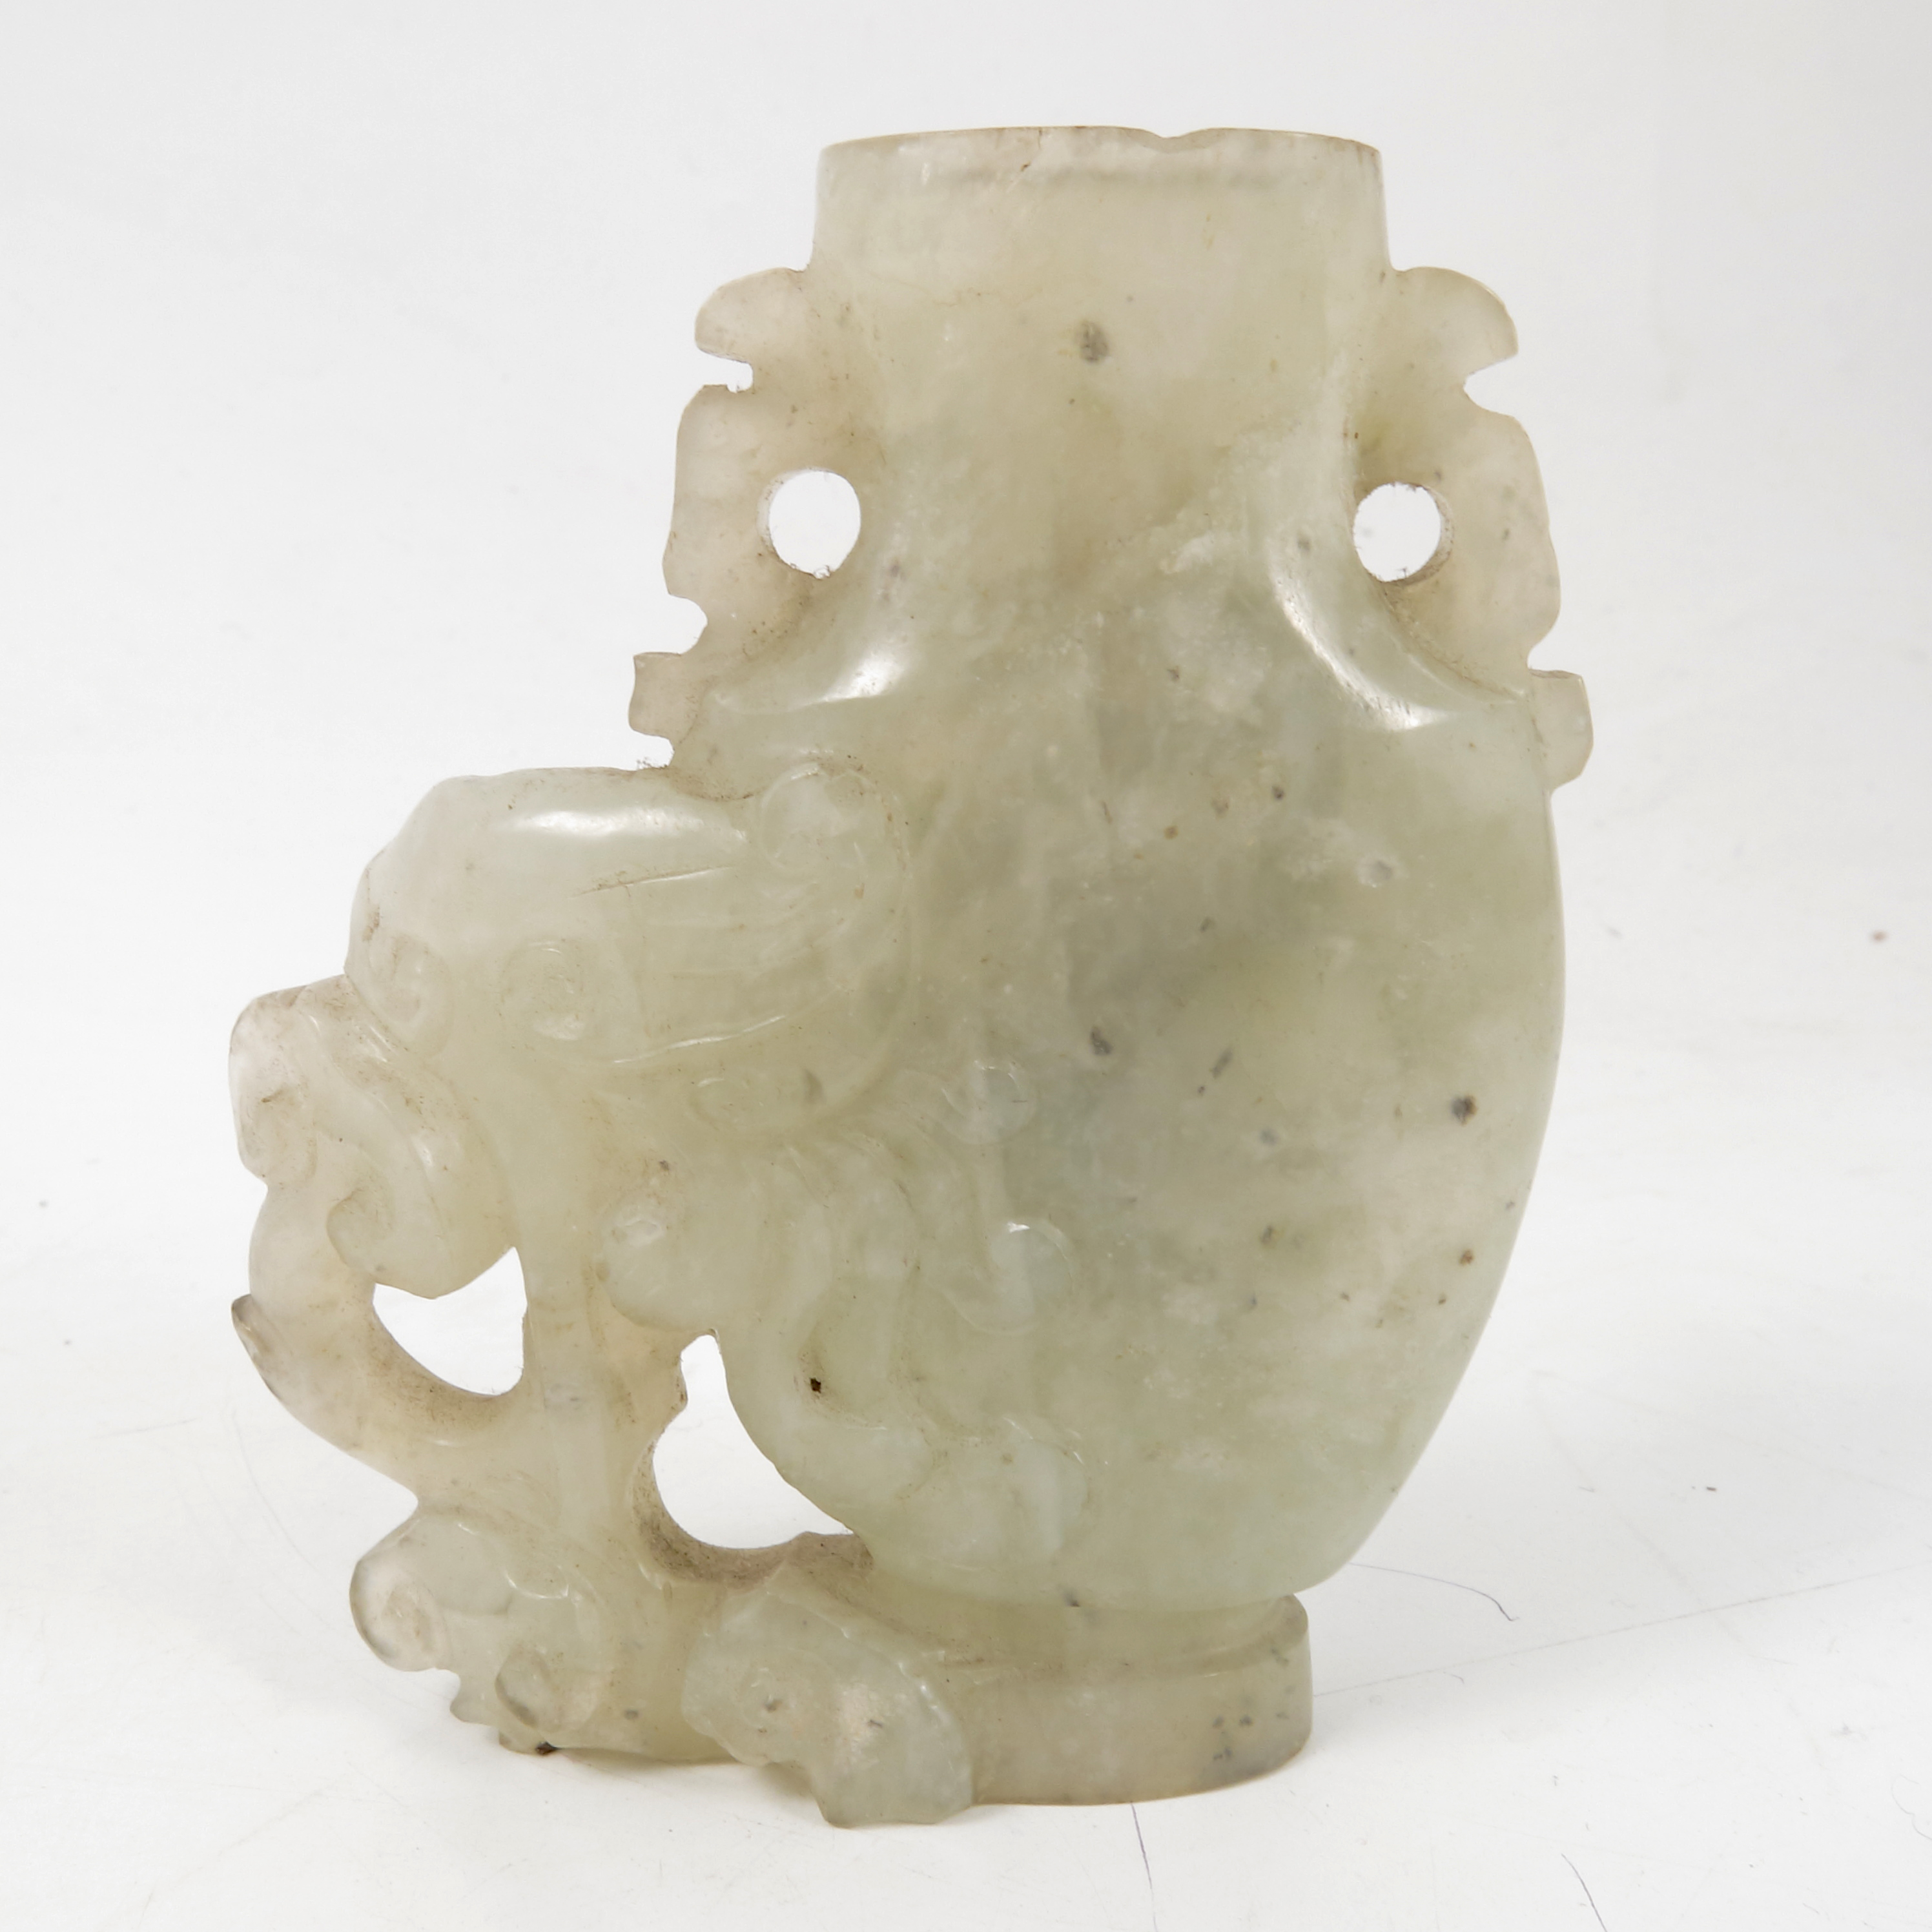 A carved hardstone vase, possibly white jade, of a stylized elephant and foliage, height 3.